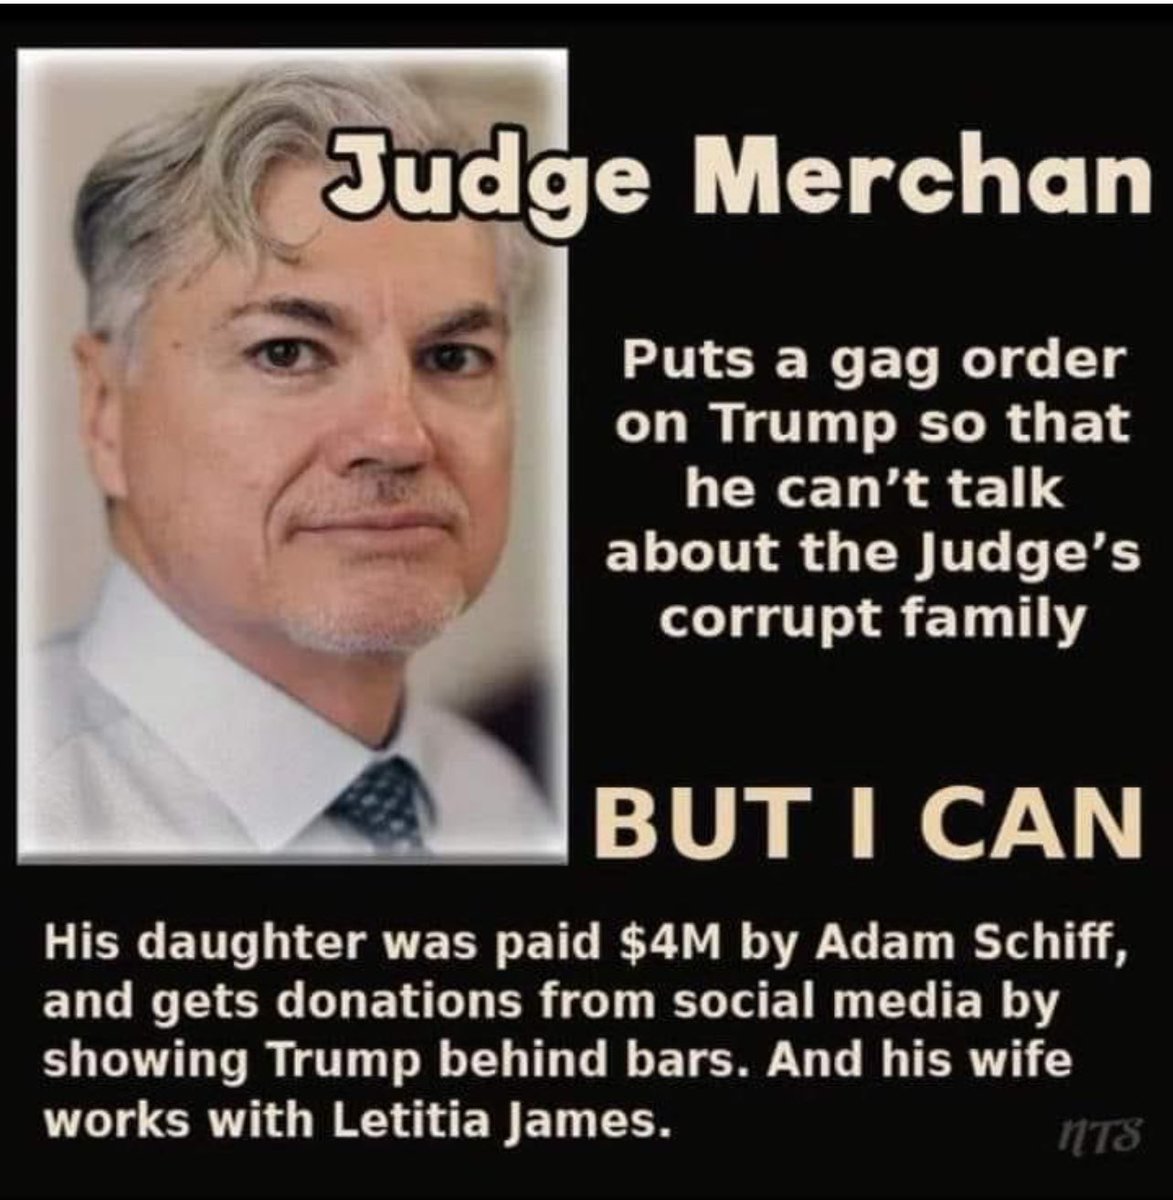 He’s corrupt and conflicted. He is the one who should be on trial!